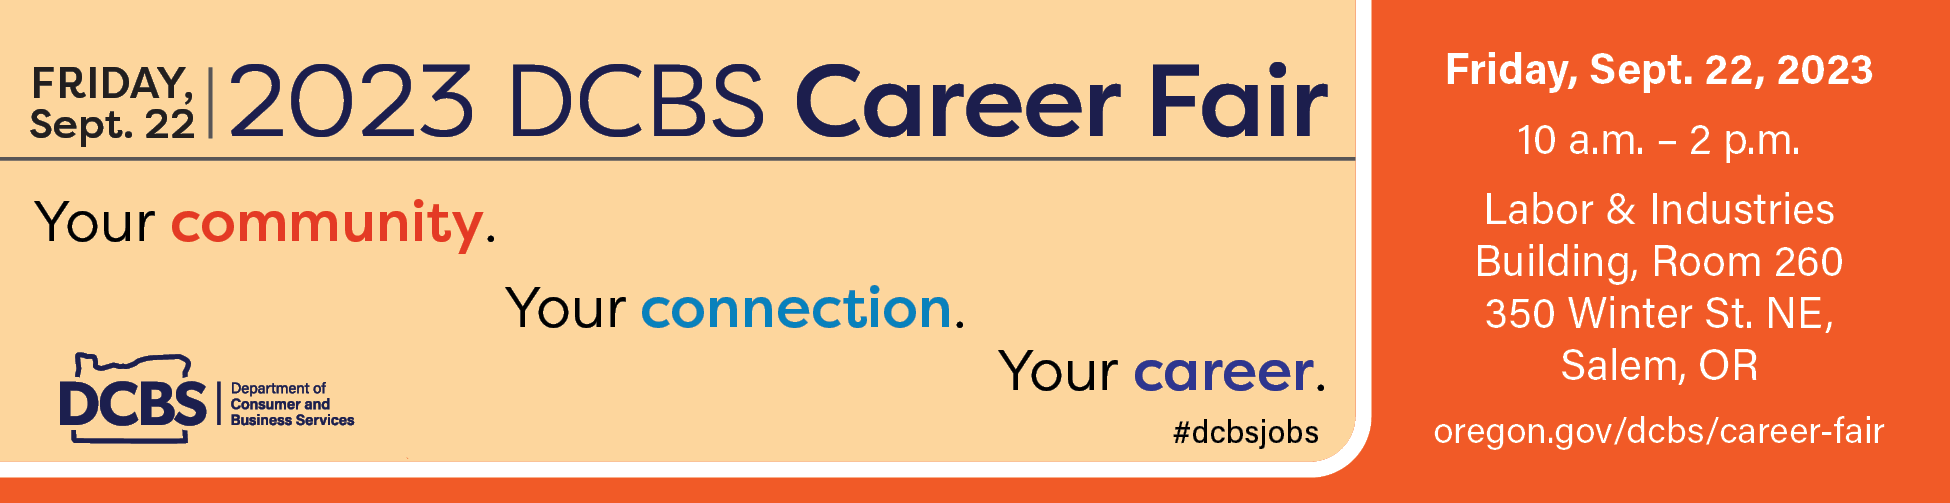 Your community. Your connection. Your career. Join us Friday, Sept. 22, 2023 for our in-person career fair at the Department of Consumer and Business Services, from 10 a.m. to 2 p.m. Learn more at oregon.go/dcbs/career-fair.